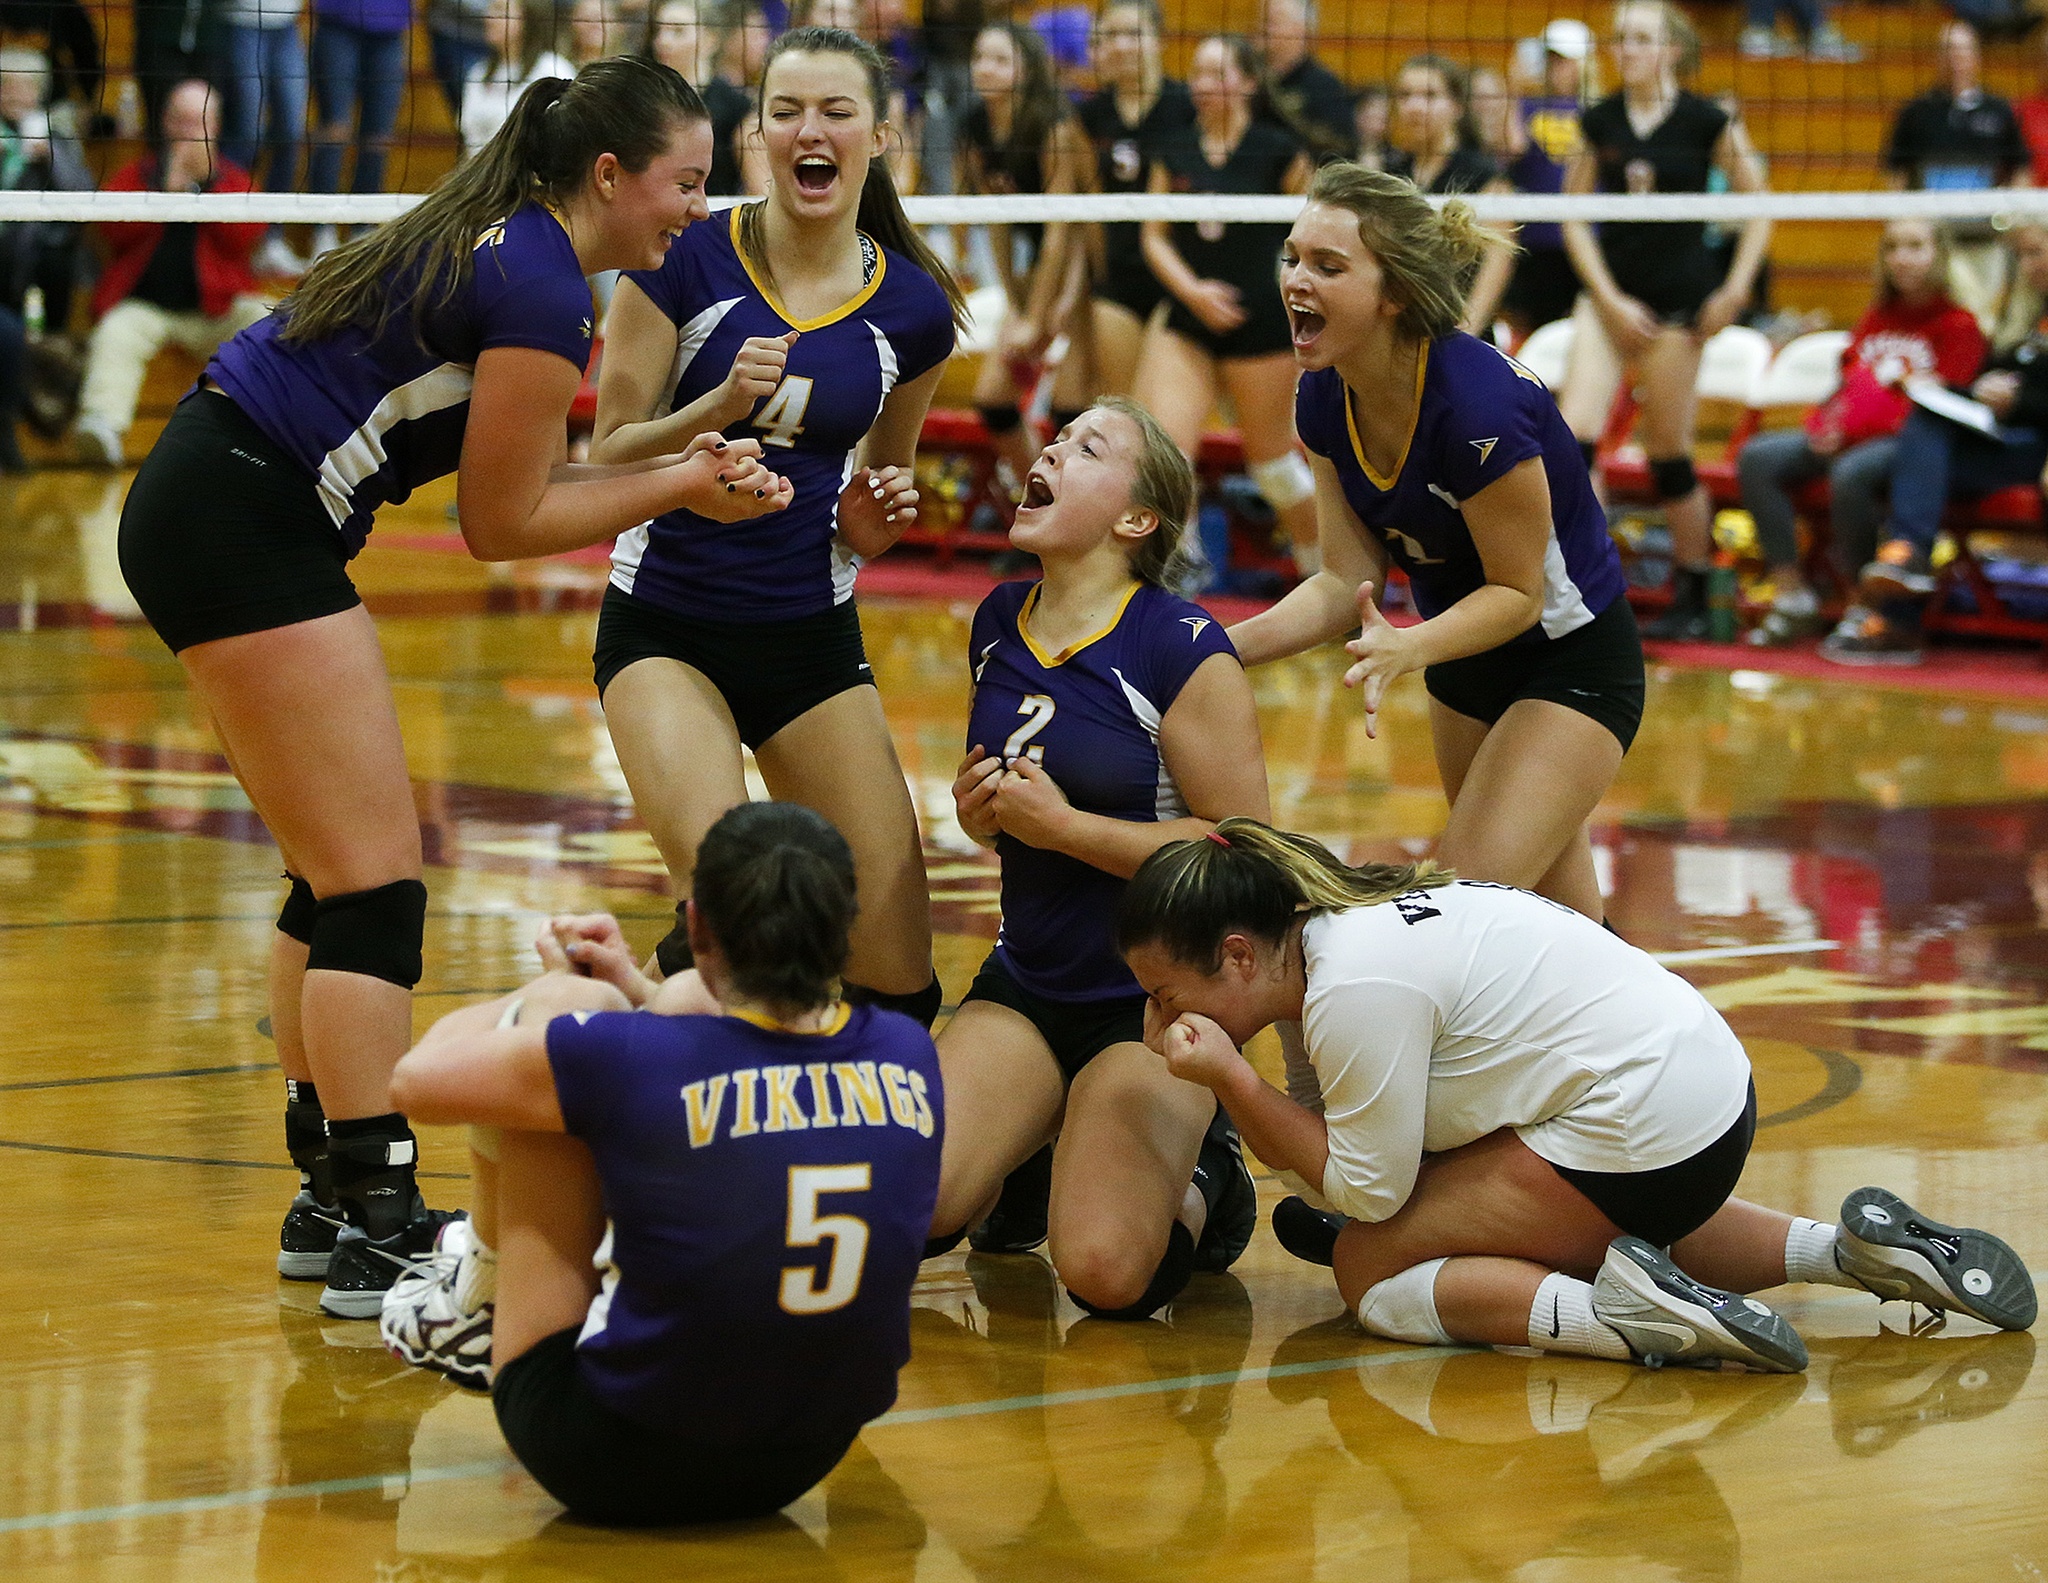 Lake Stevens players (from left) Hannah Aaenson, Gabby Gunterman (5), Grace Schroedl, Lilly Eason, Emily Lubick and Melissa Stevens celebrate together after scoring the final point to defeat Monroe for the 4A District 1 championship Thursday at Marysville Pilchuck High School. (Ian Terry / The Herald)